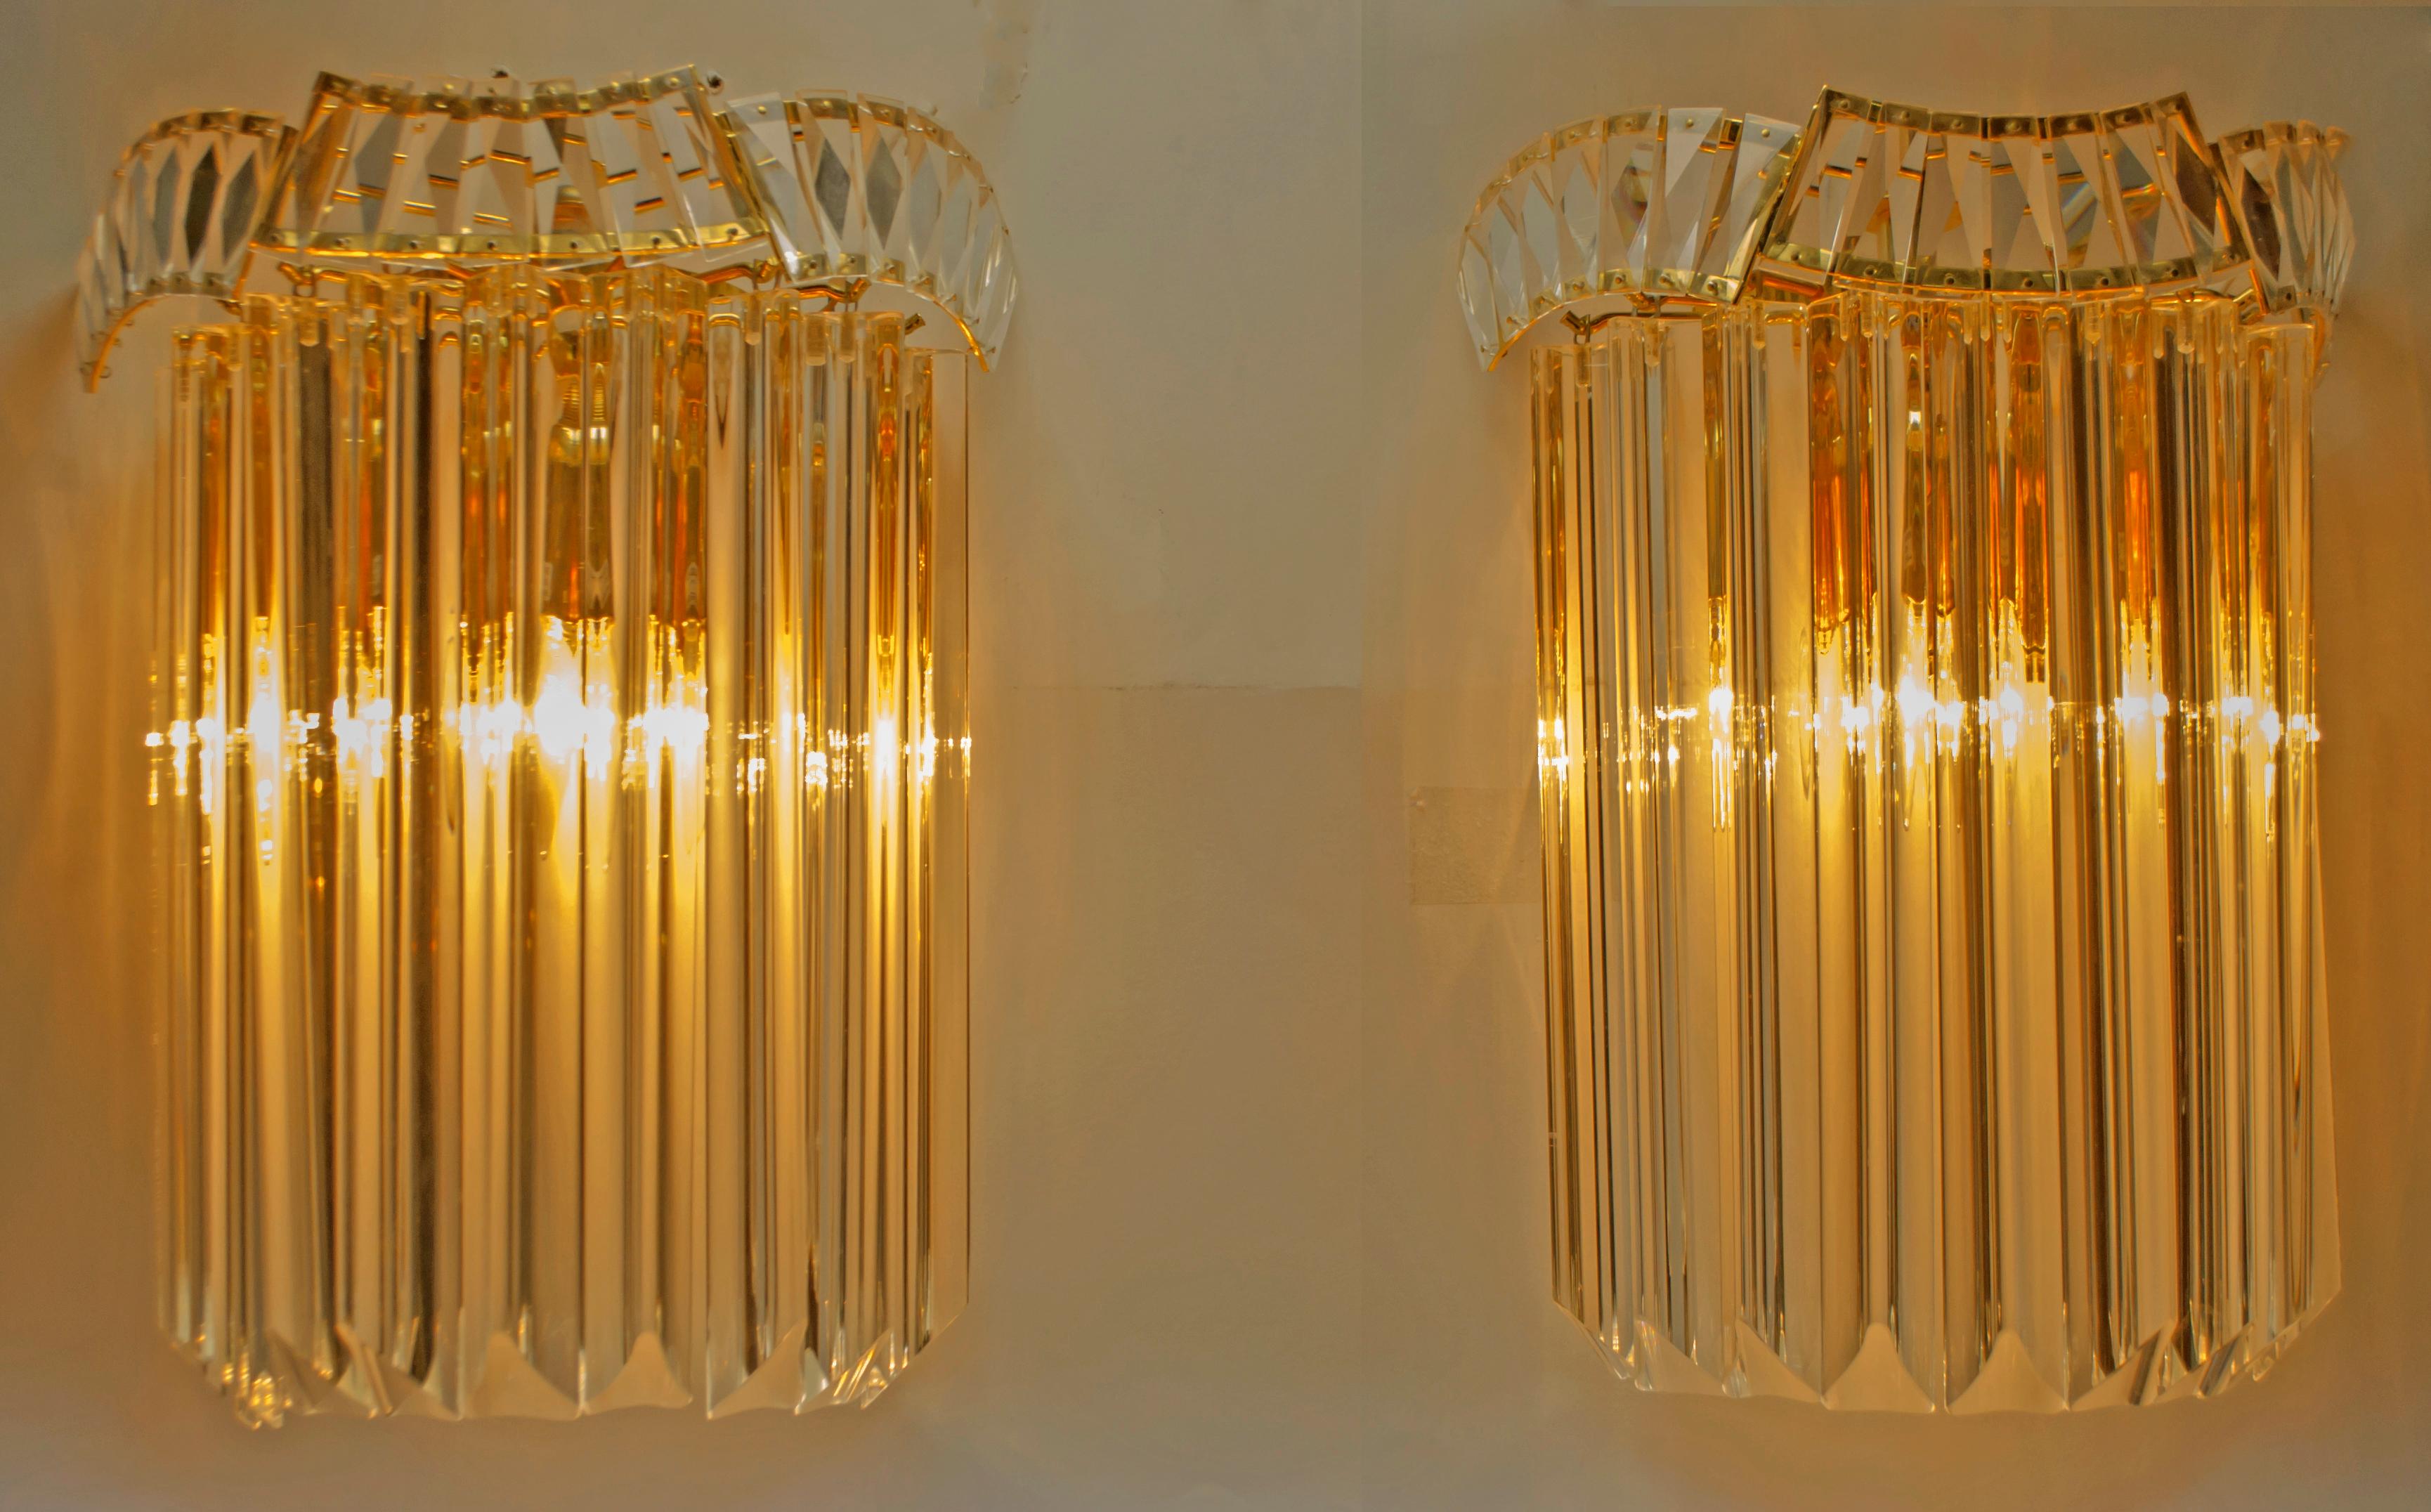 This pair of sconces consists of 9 Triedri each, in Murano glass and was produced by Venini in the 1970s, in Liberty style, they have a gilded brass structure.

Paolo Venini (1895-1959) emerged as one of the leading figures in the production of